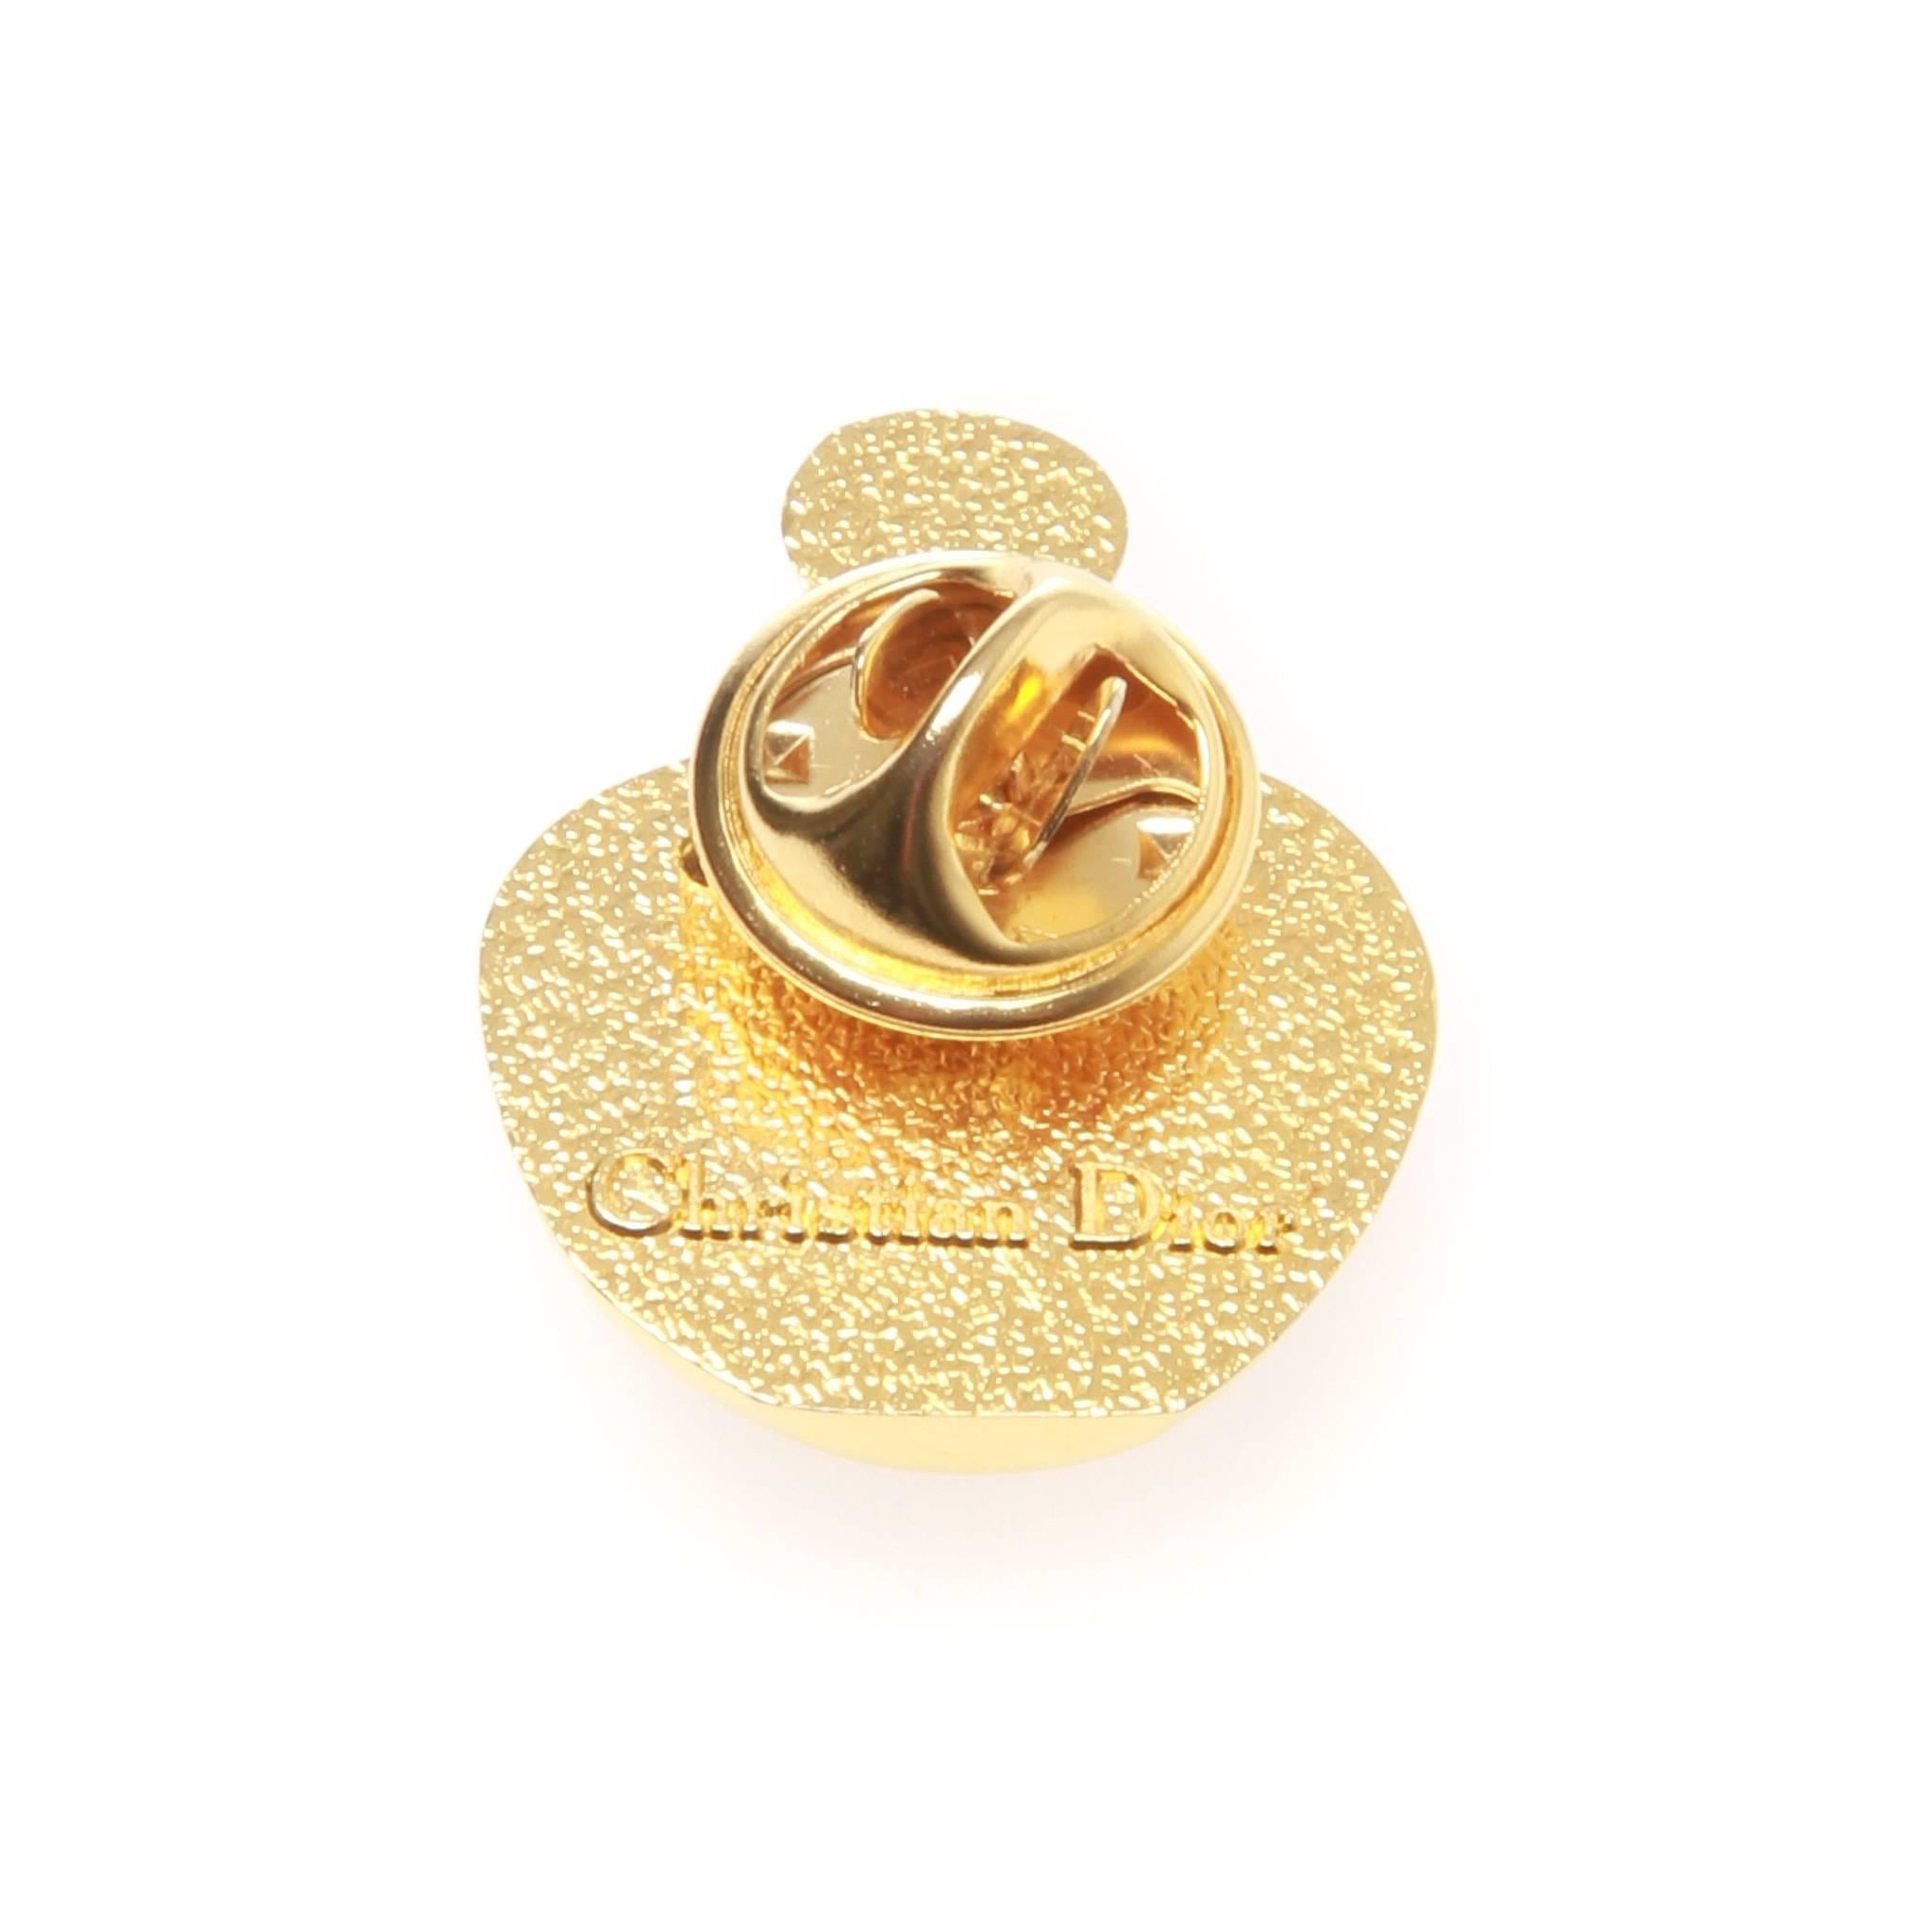 A fabulous vintage gold-tone poison bottle brooch made in the 80's by CHRISTIAN DIOR.

